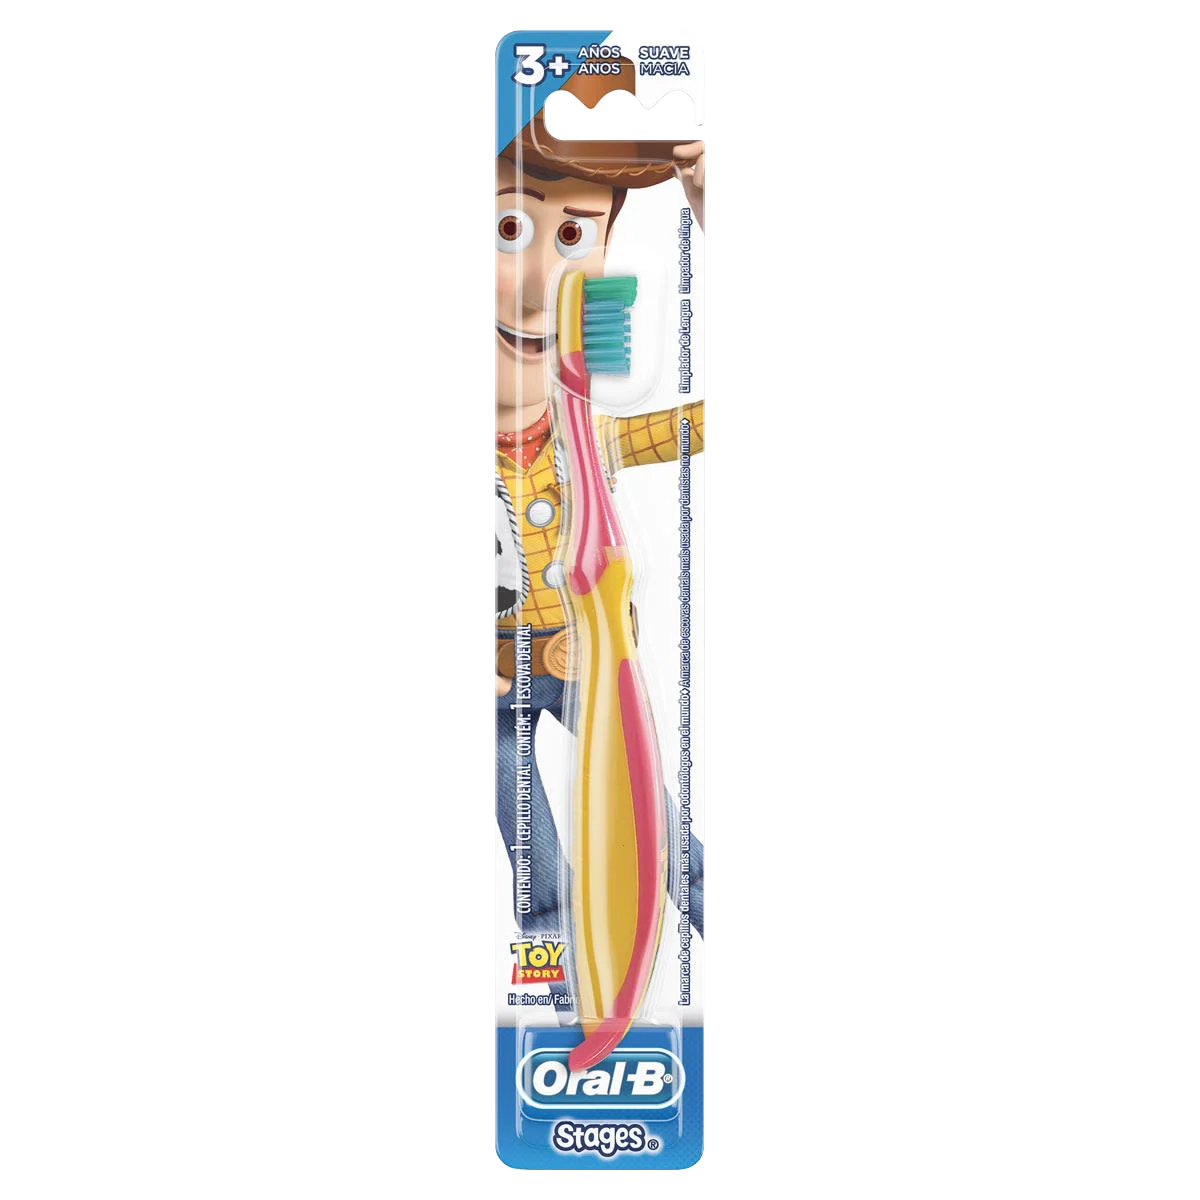 Cepillo Dental Oral-B Pro Salud Stages (Toy Story, Princesas) 